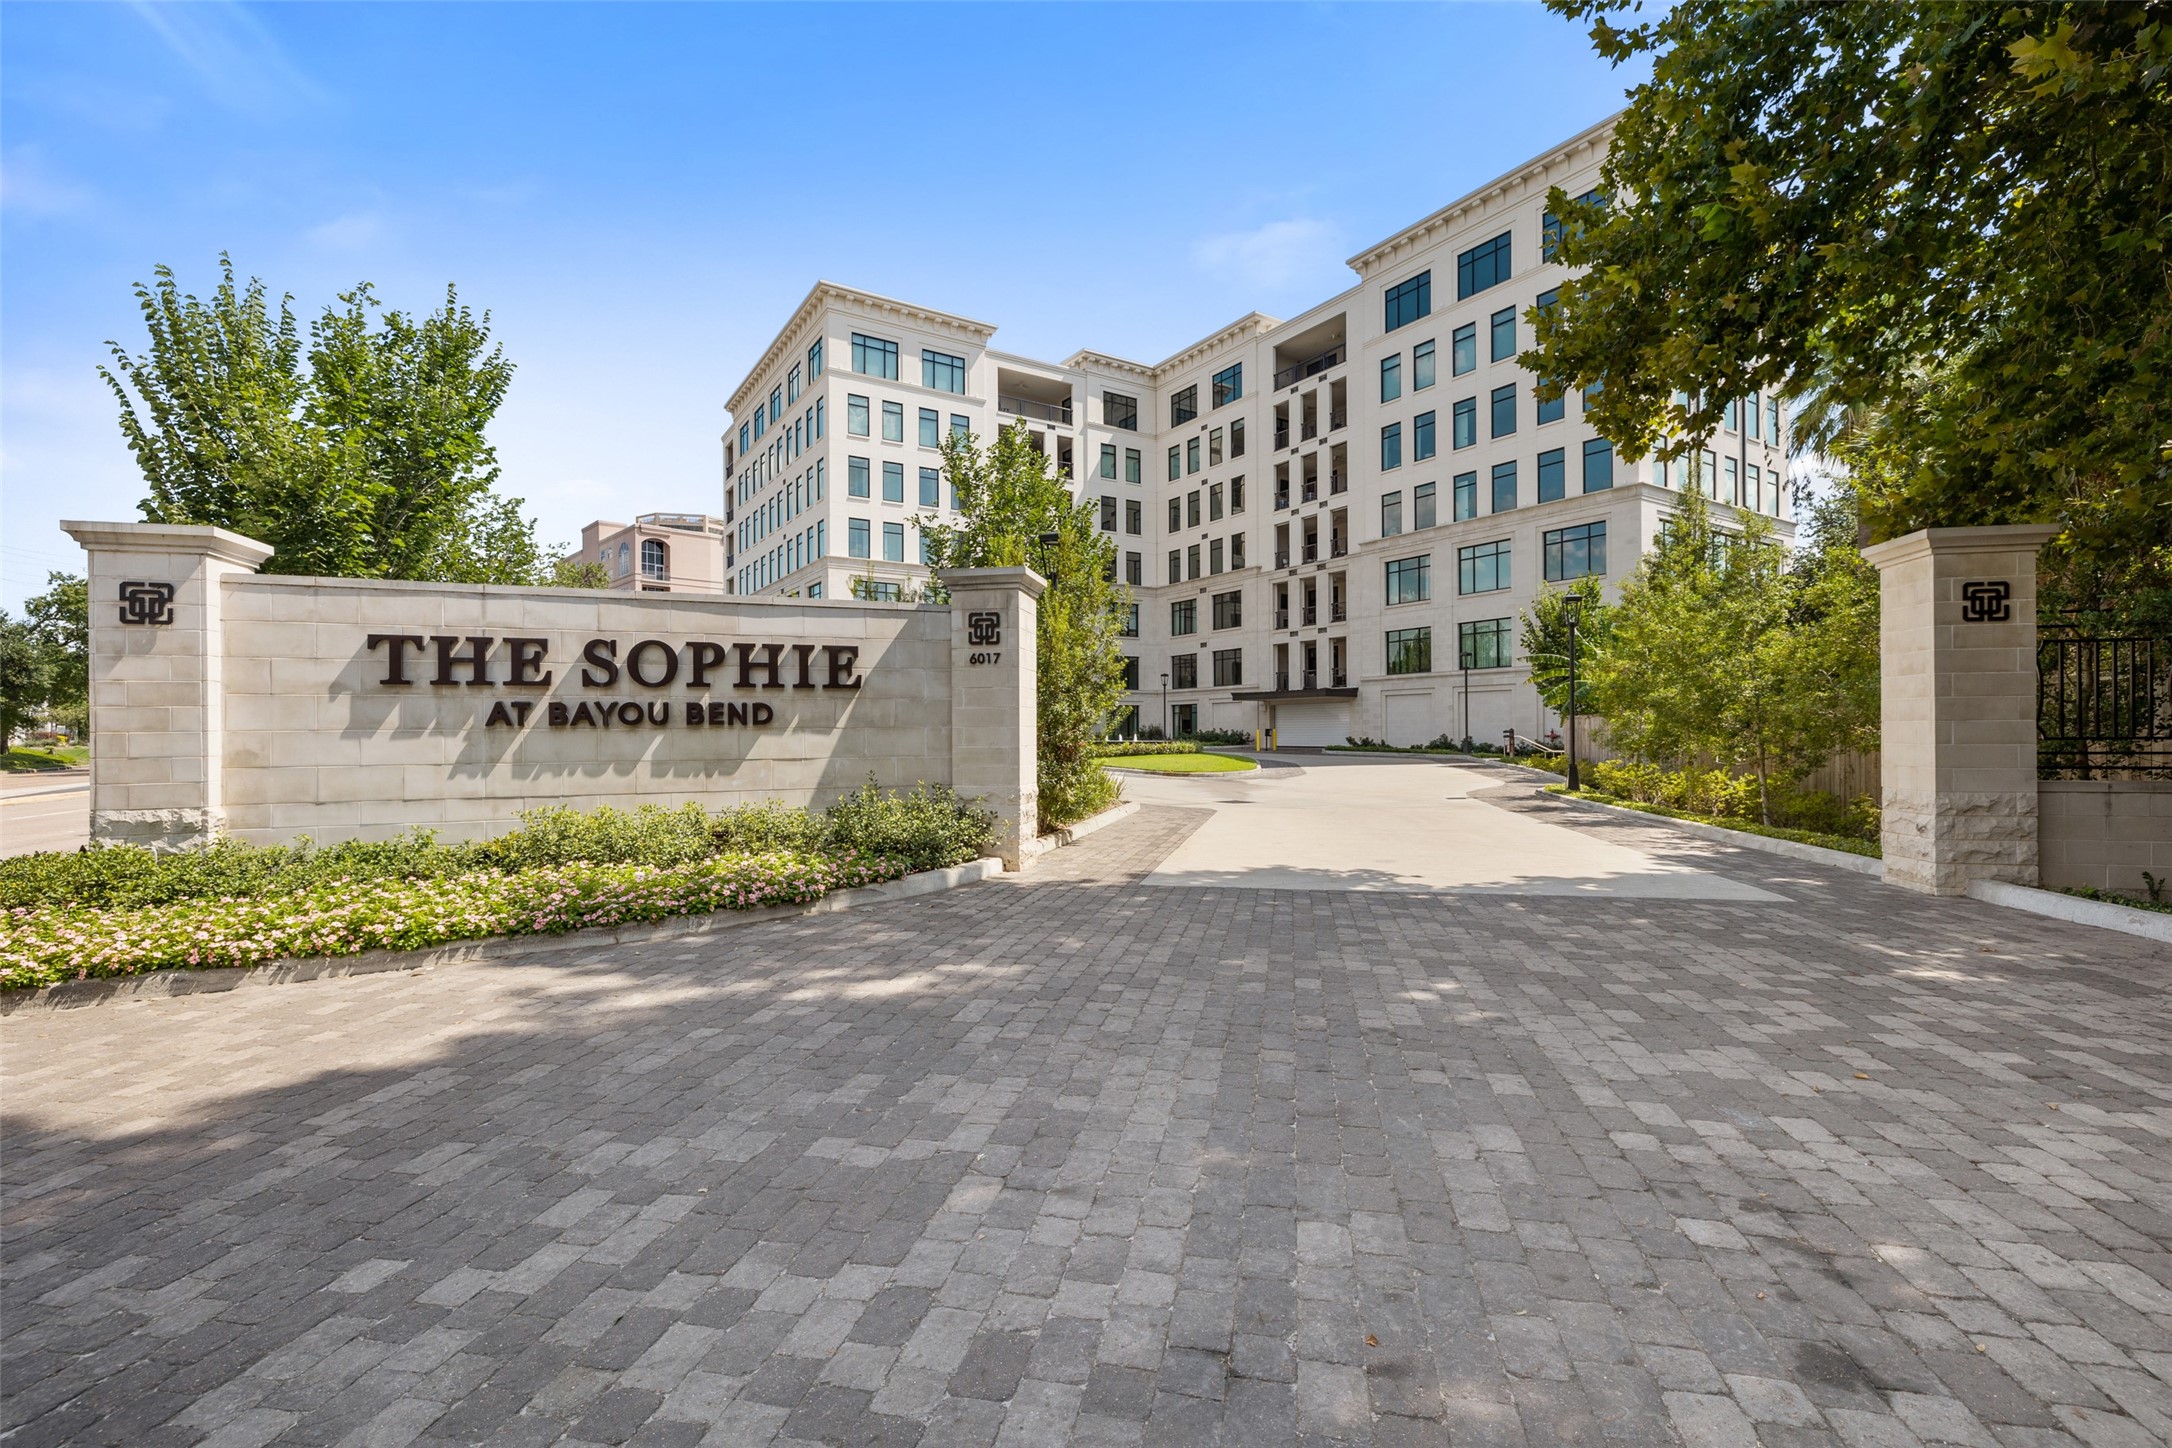 The Sophie's Motor Court is sophisticated and welcoming.